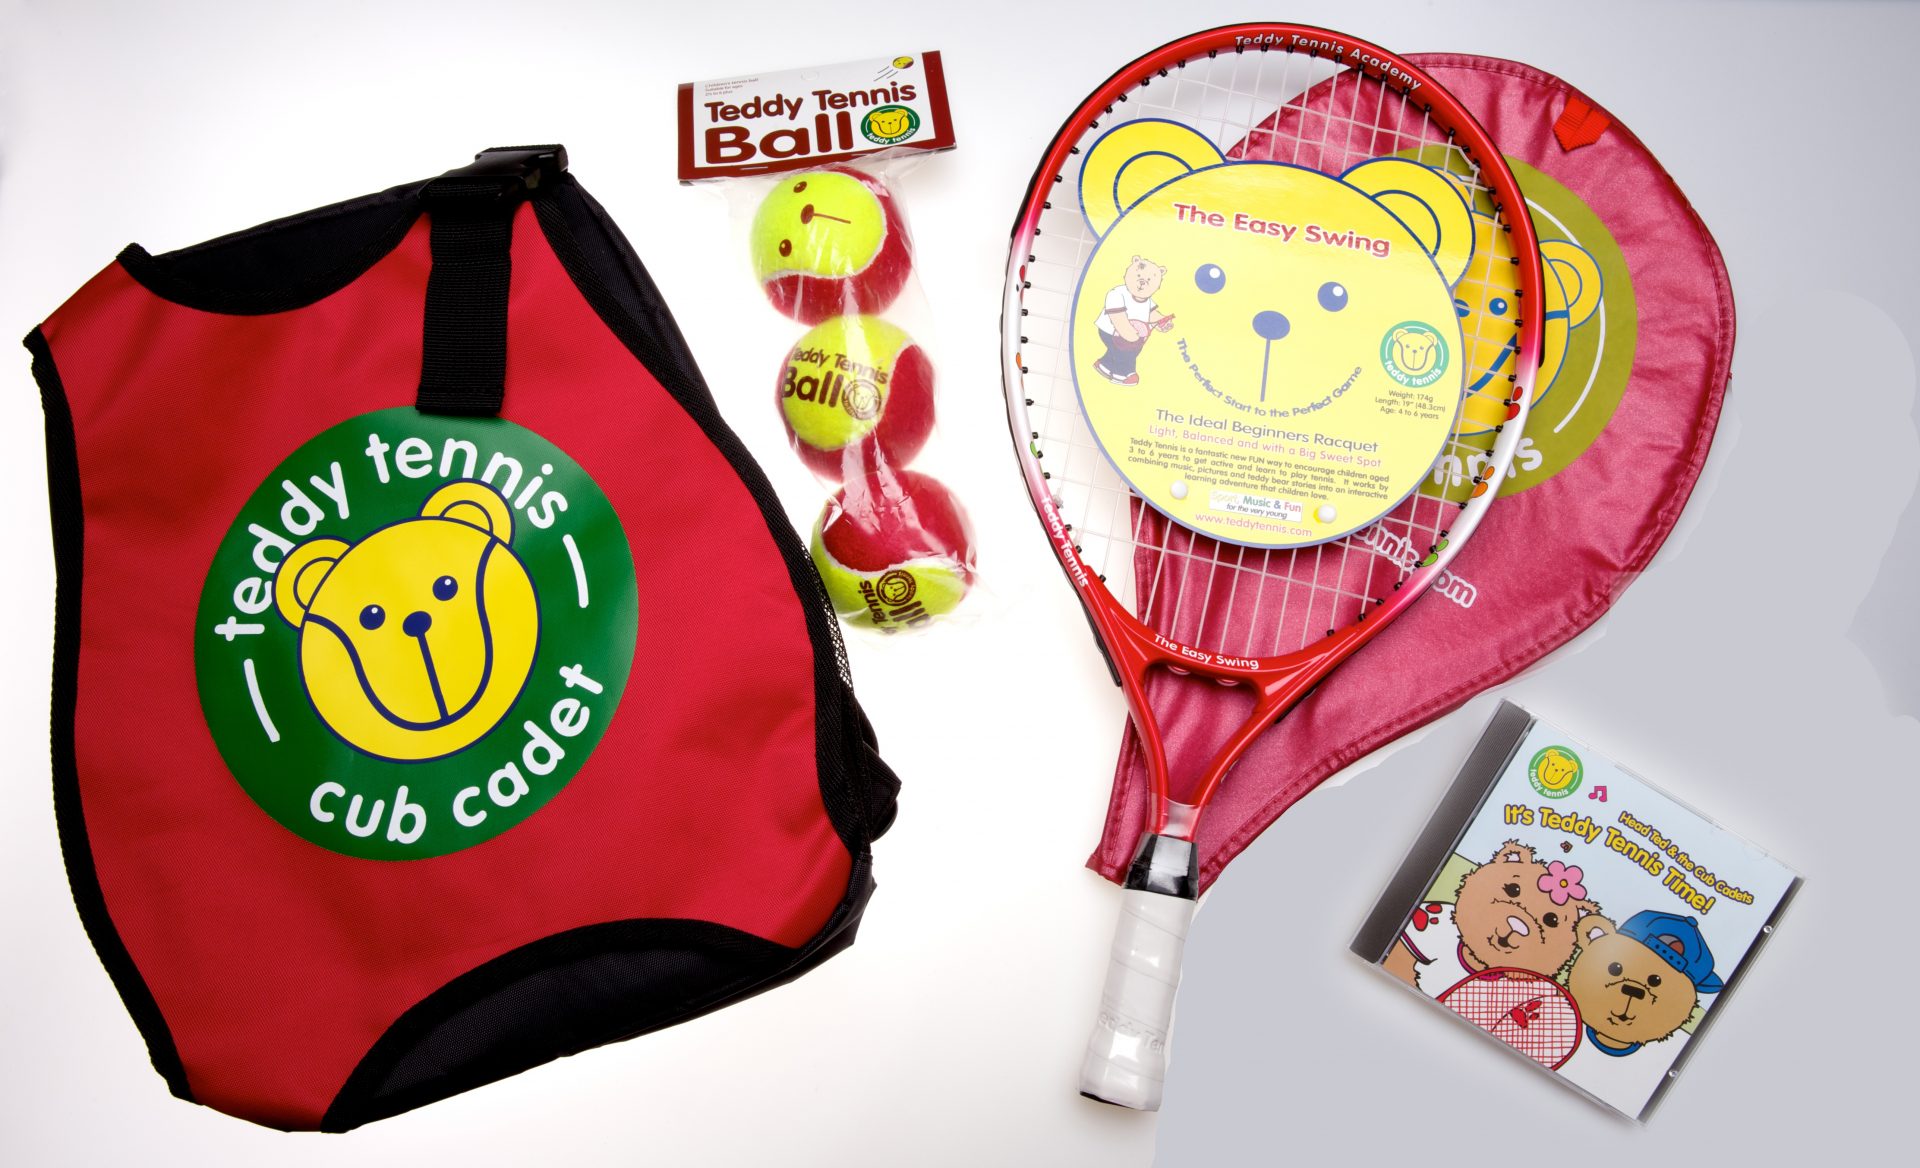 Tennis set for children aged 2½ to 4 years